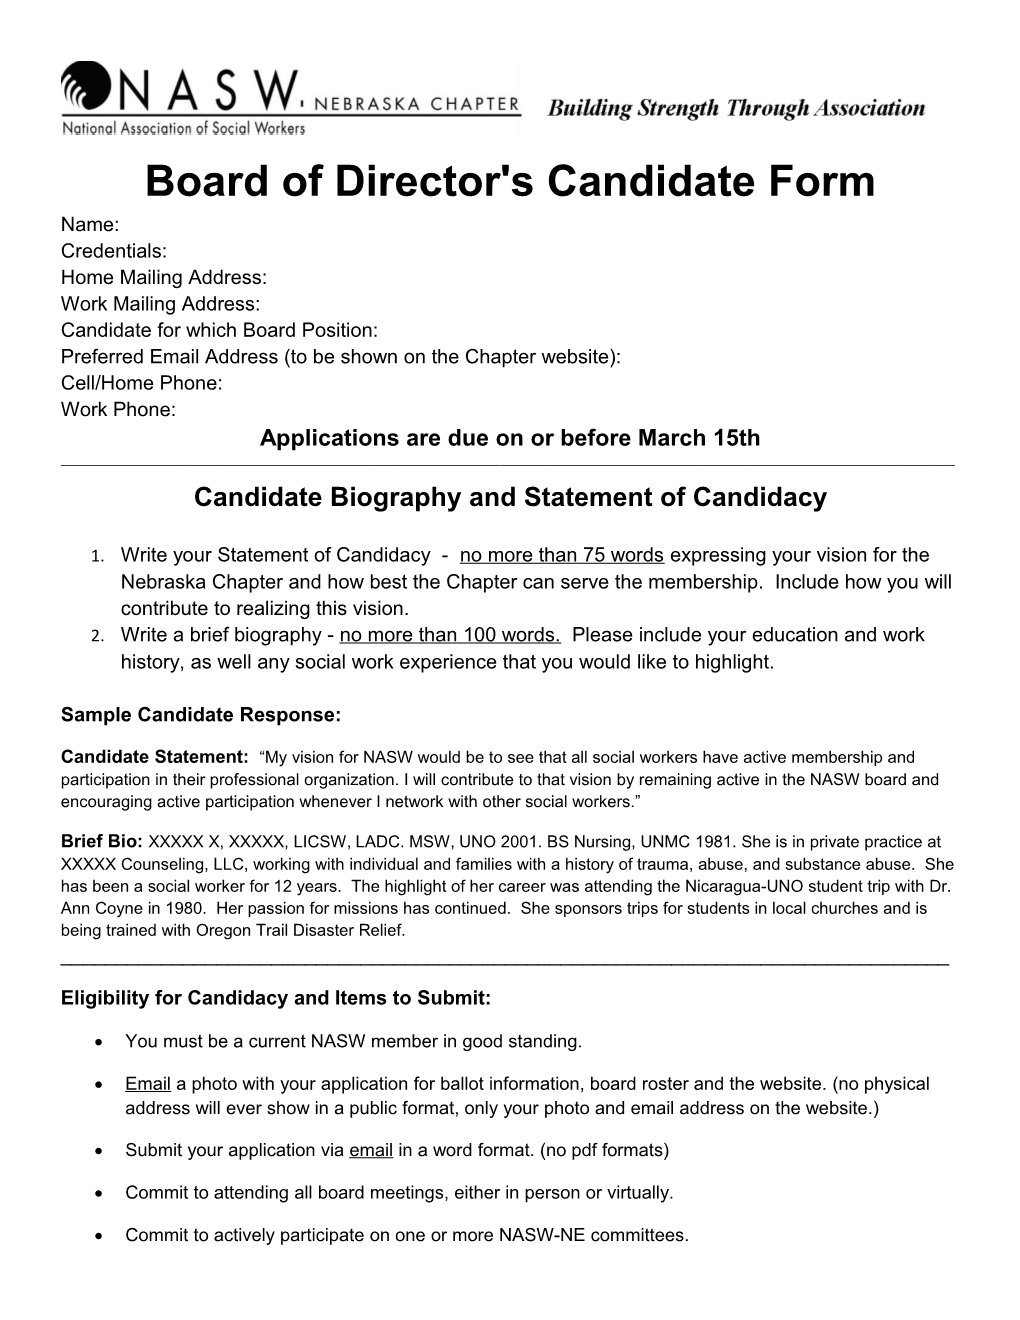 Board of Director's Candidate Form